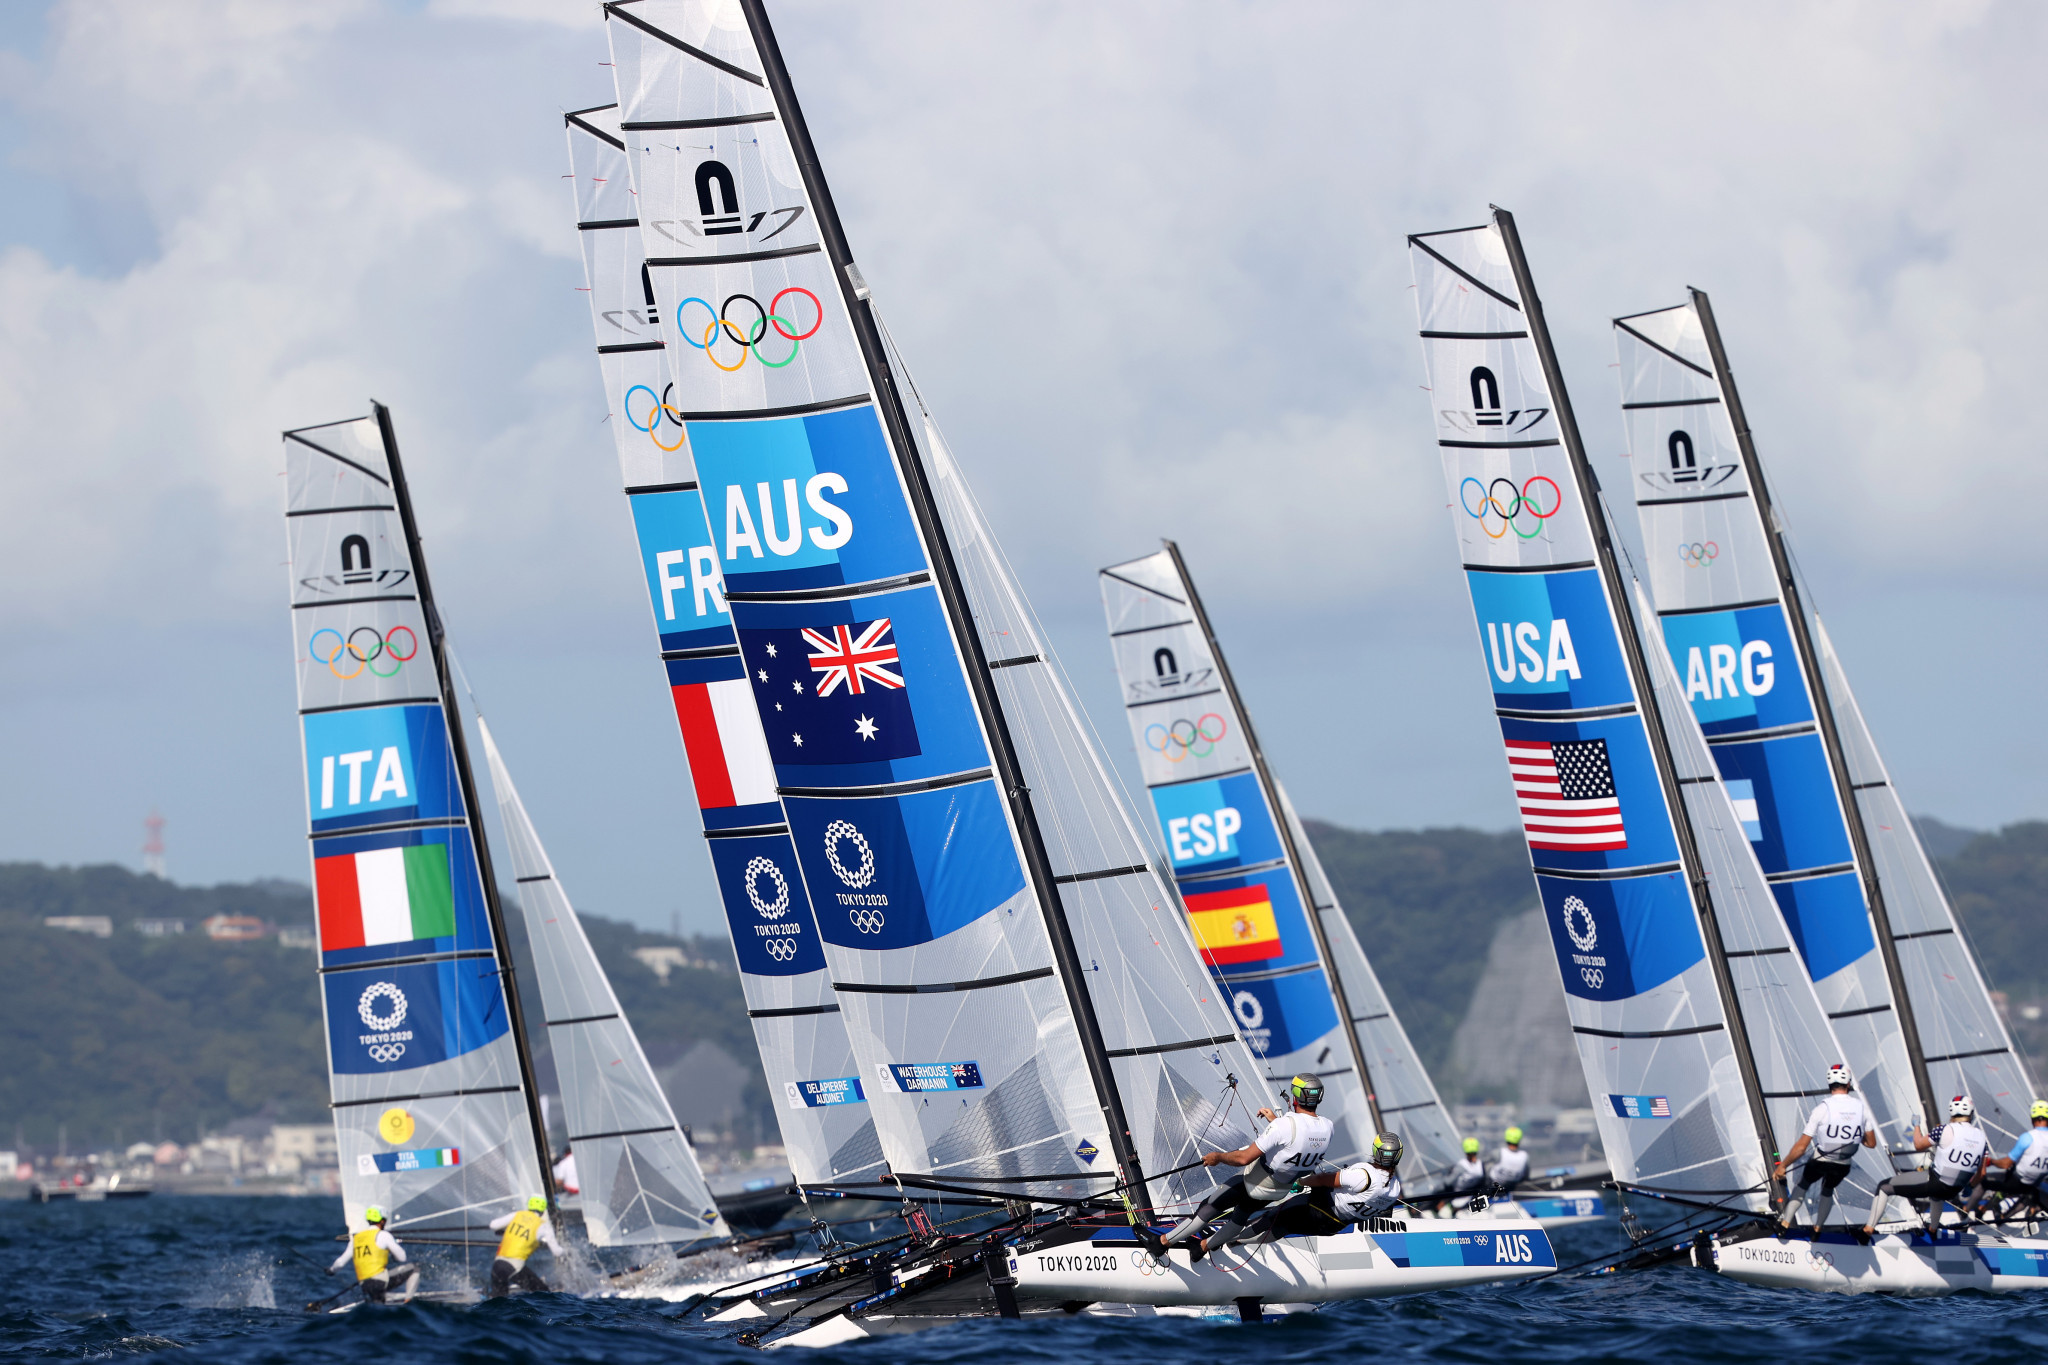 Nacra 17 is one of the 10 classes sailors can compete in at Paris 2024 and which qualifying for will be on the line at the Sailing World Championships in The Hague ©Getty Images